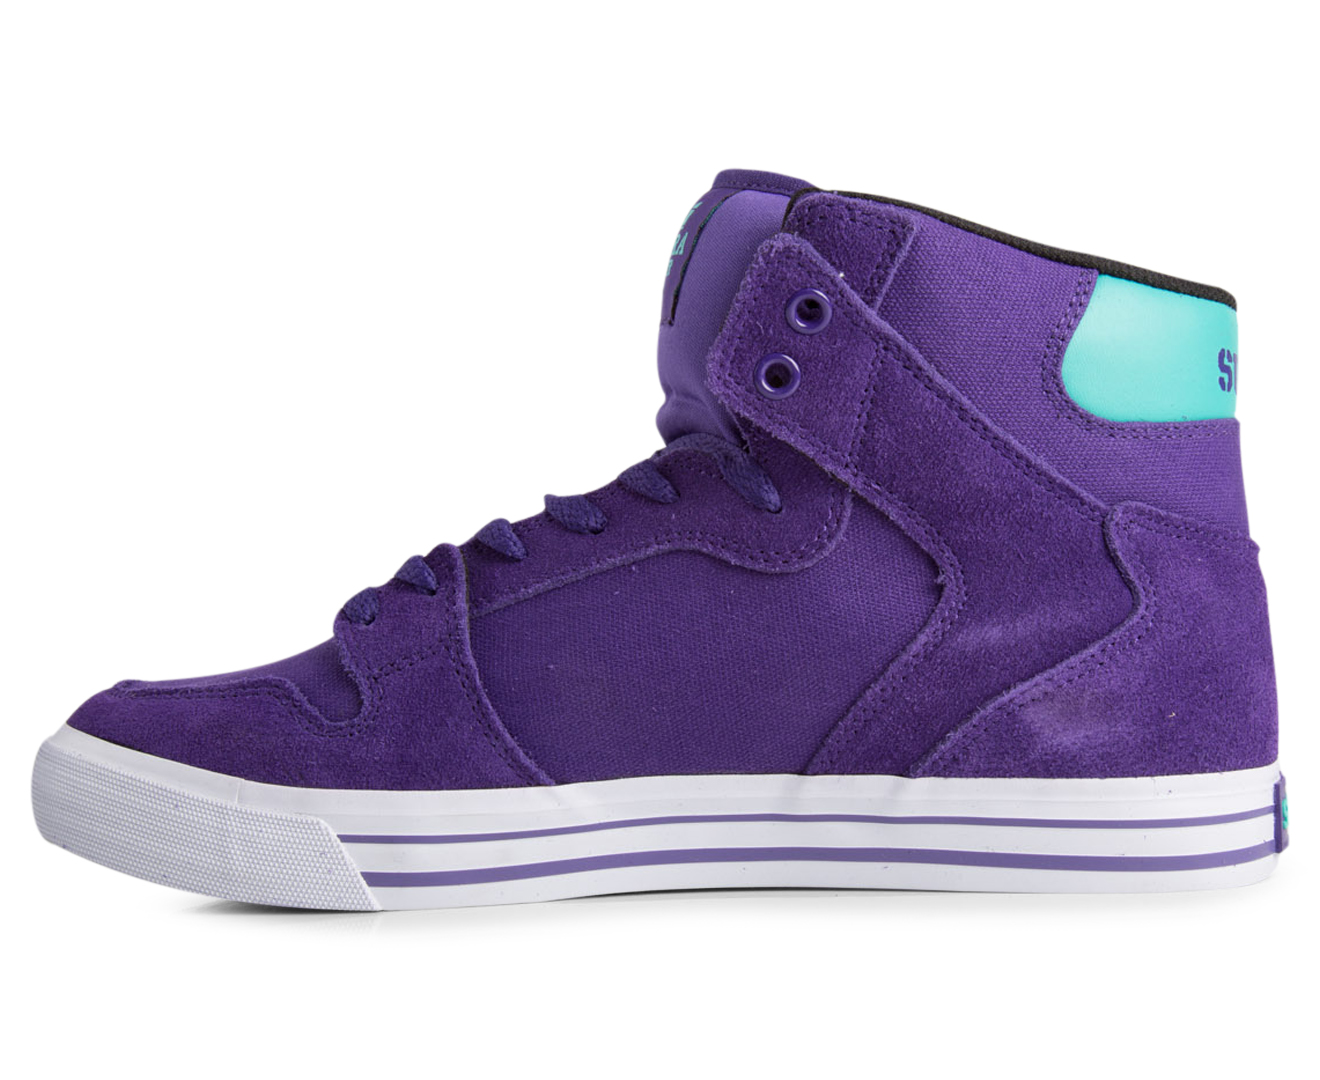 Supra Men's Vaider High Top Shoe - Purple/Teal | Great daily deals at ...